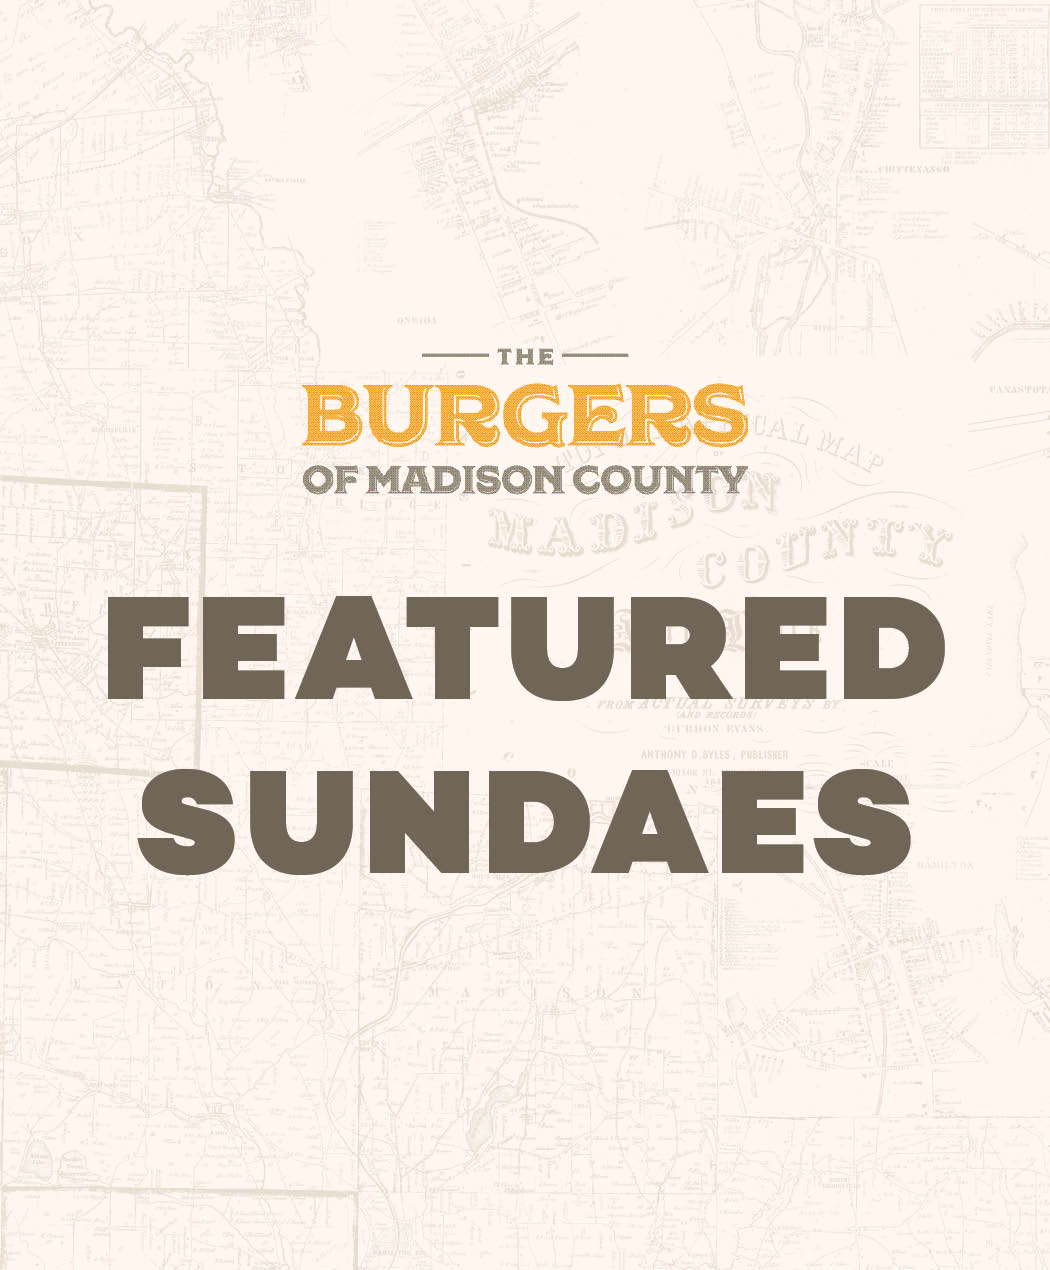 Burgers of Madison County - Featured Sundaes